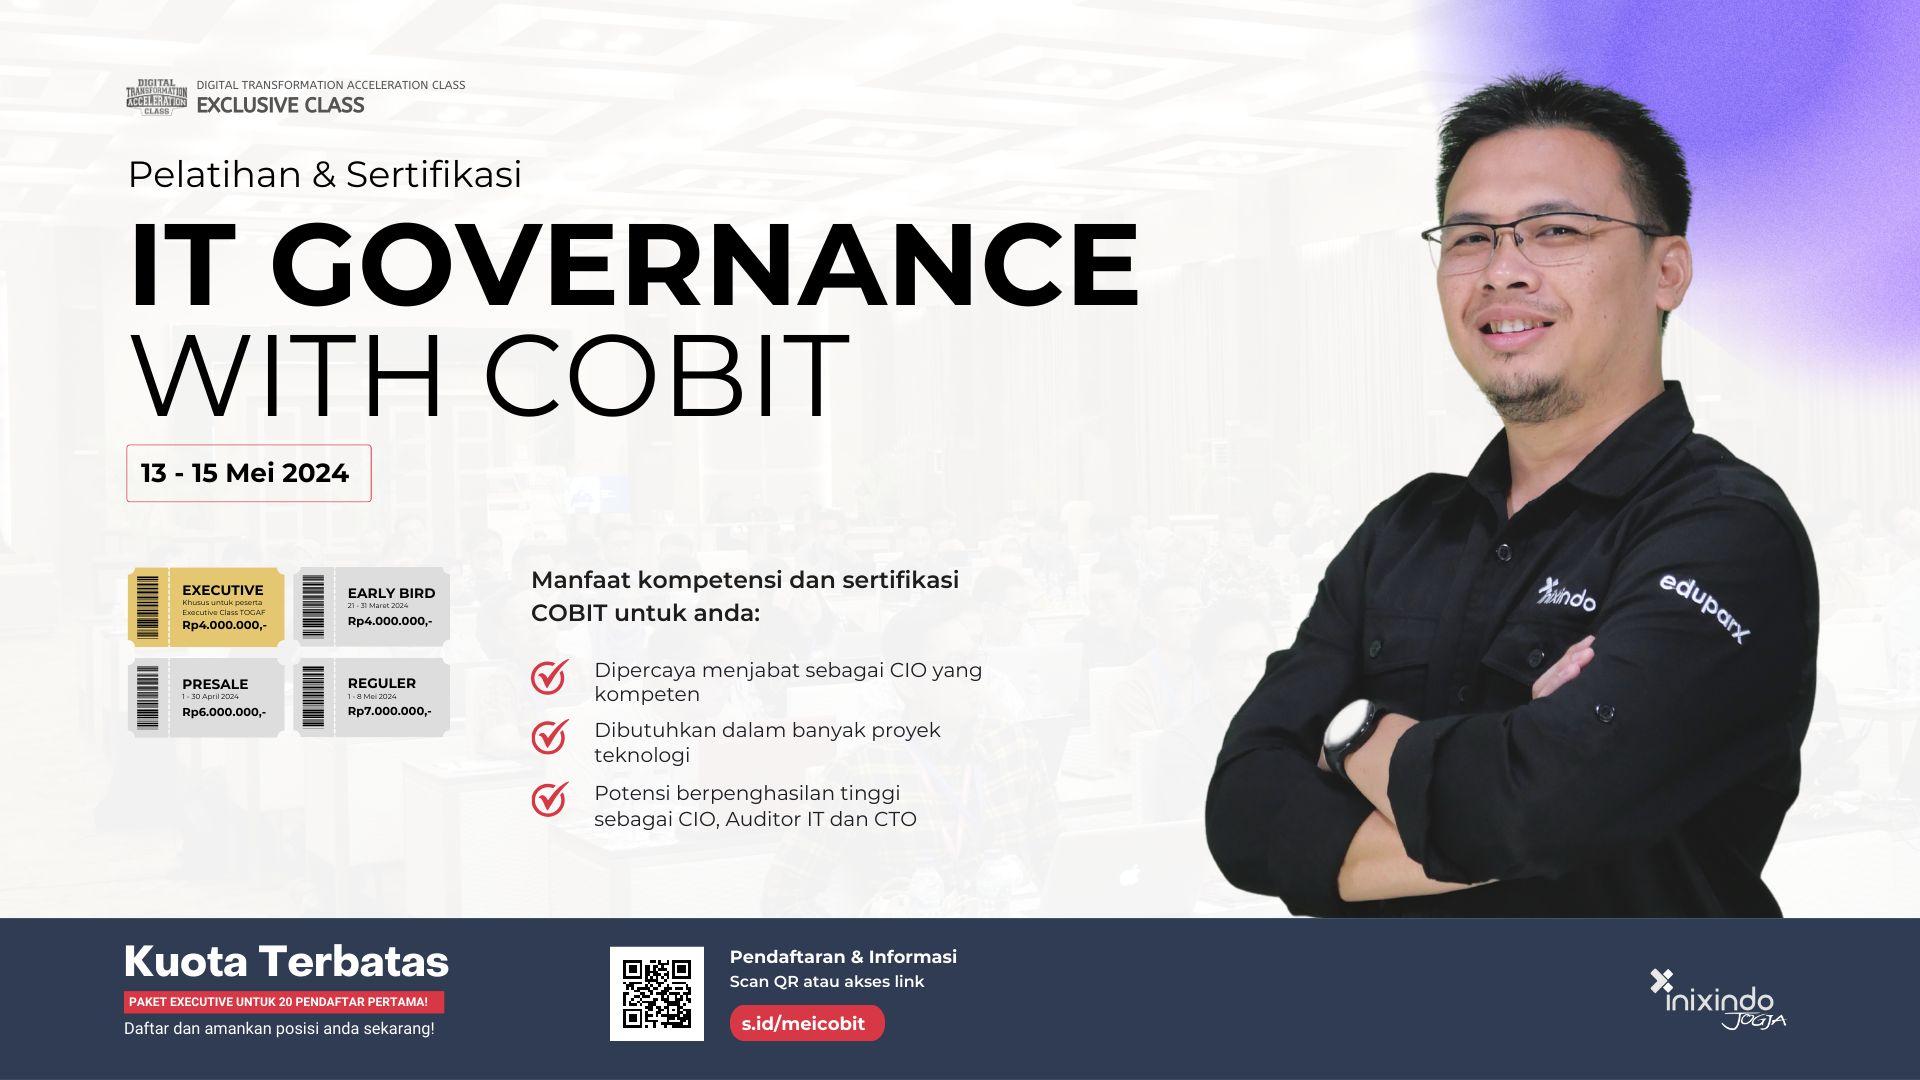 IT Governance with COBIT 2019 7